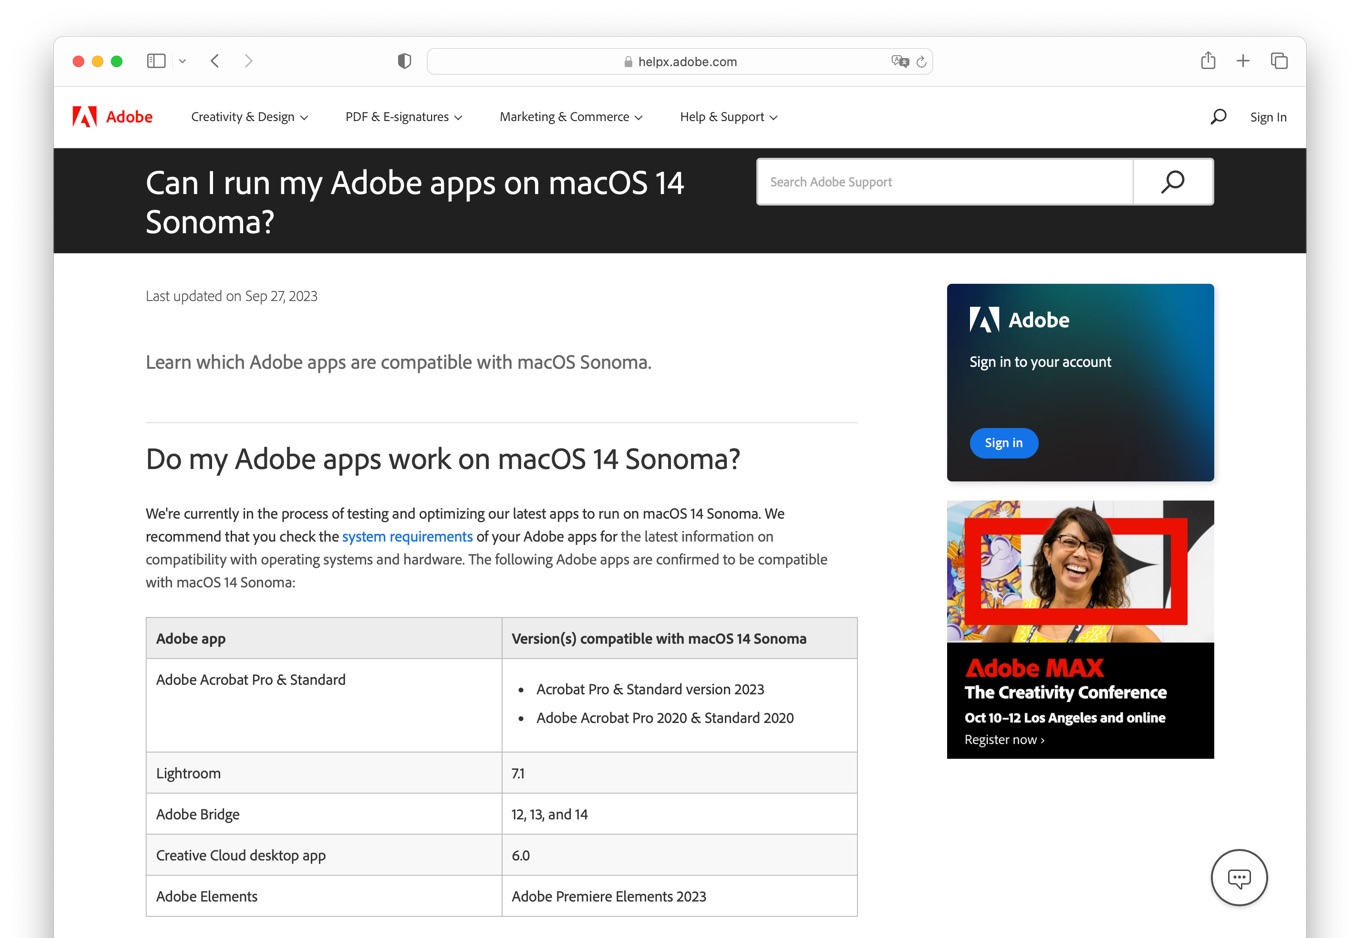 Adobe apps are compatible with macOS Sonoma